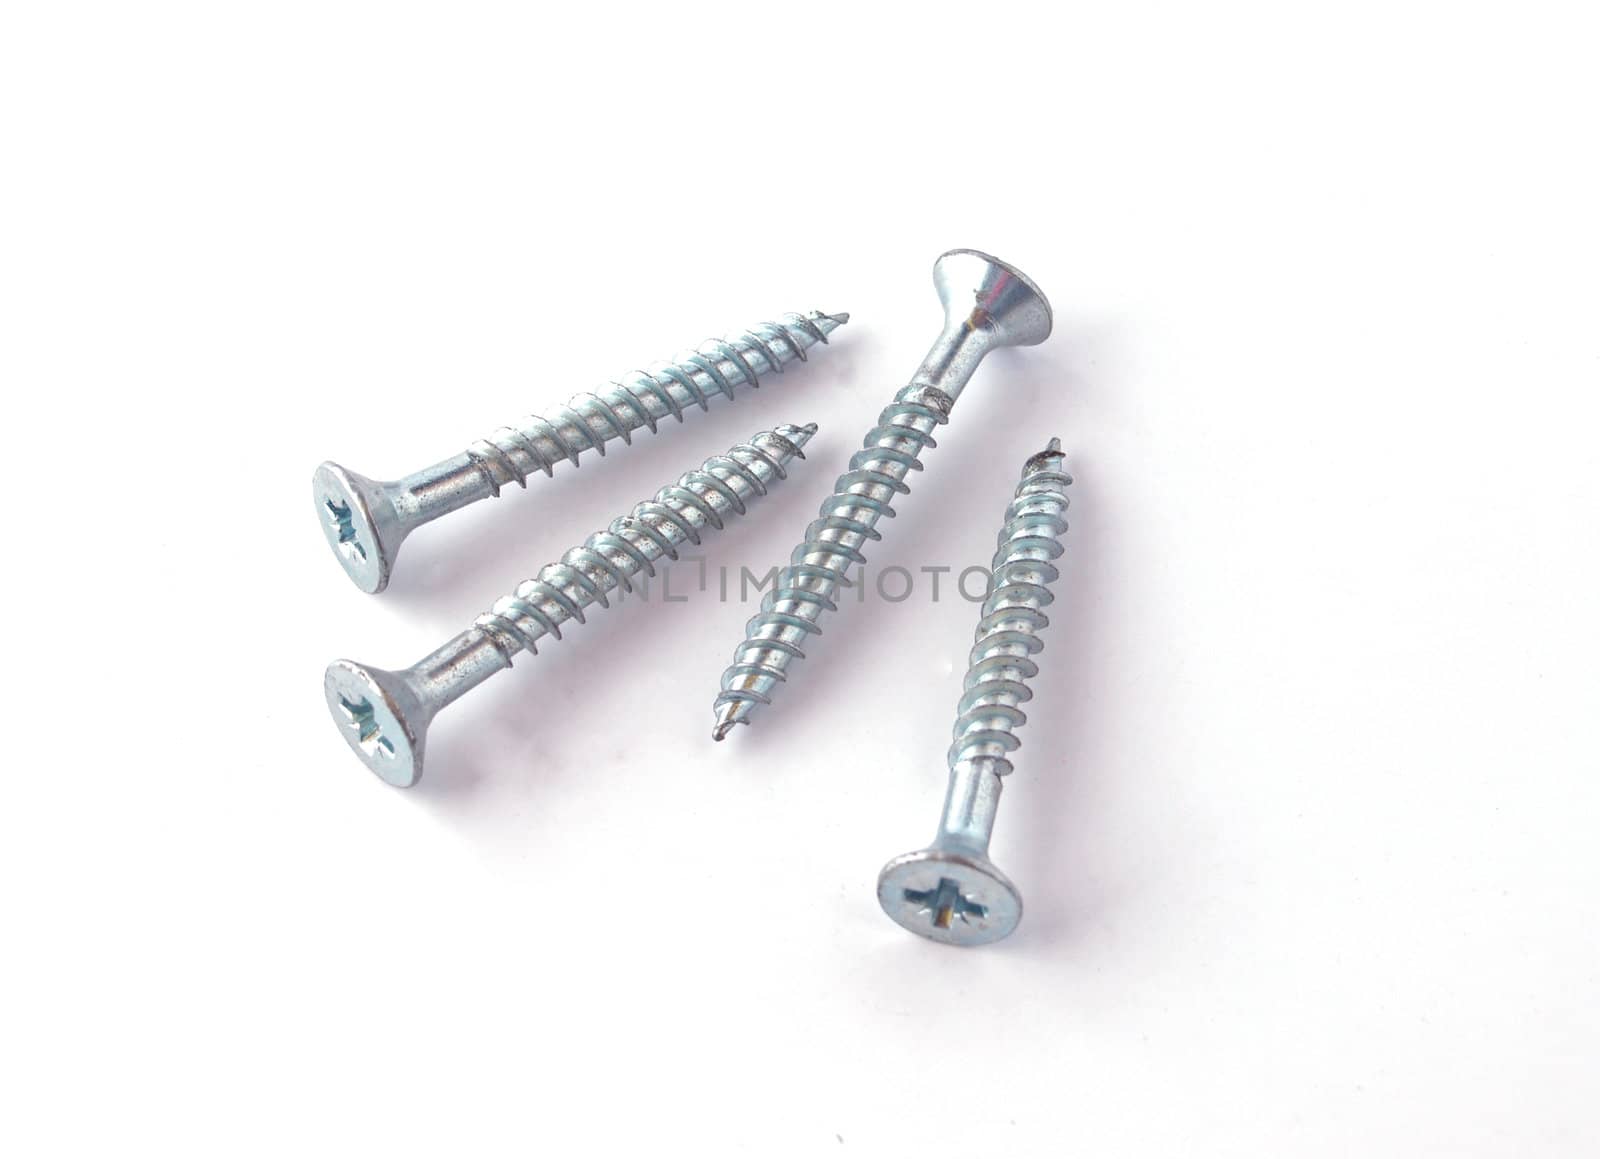 Countersunk wood screws on a white background.